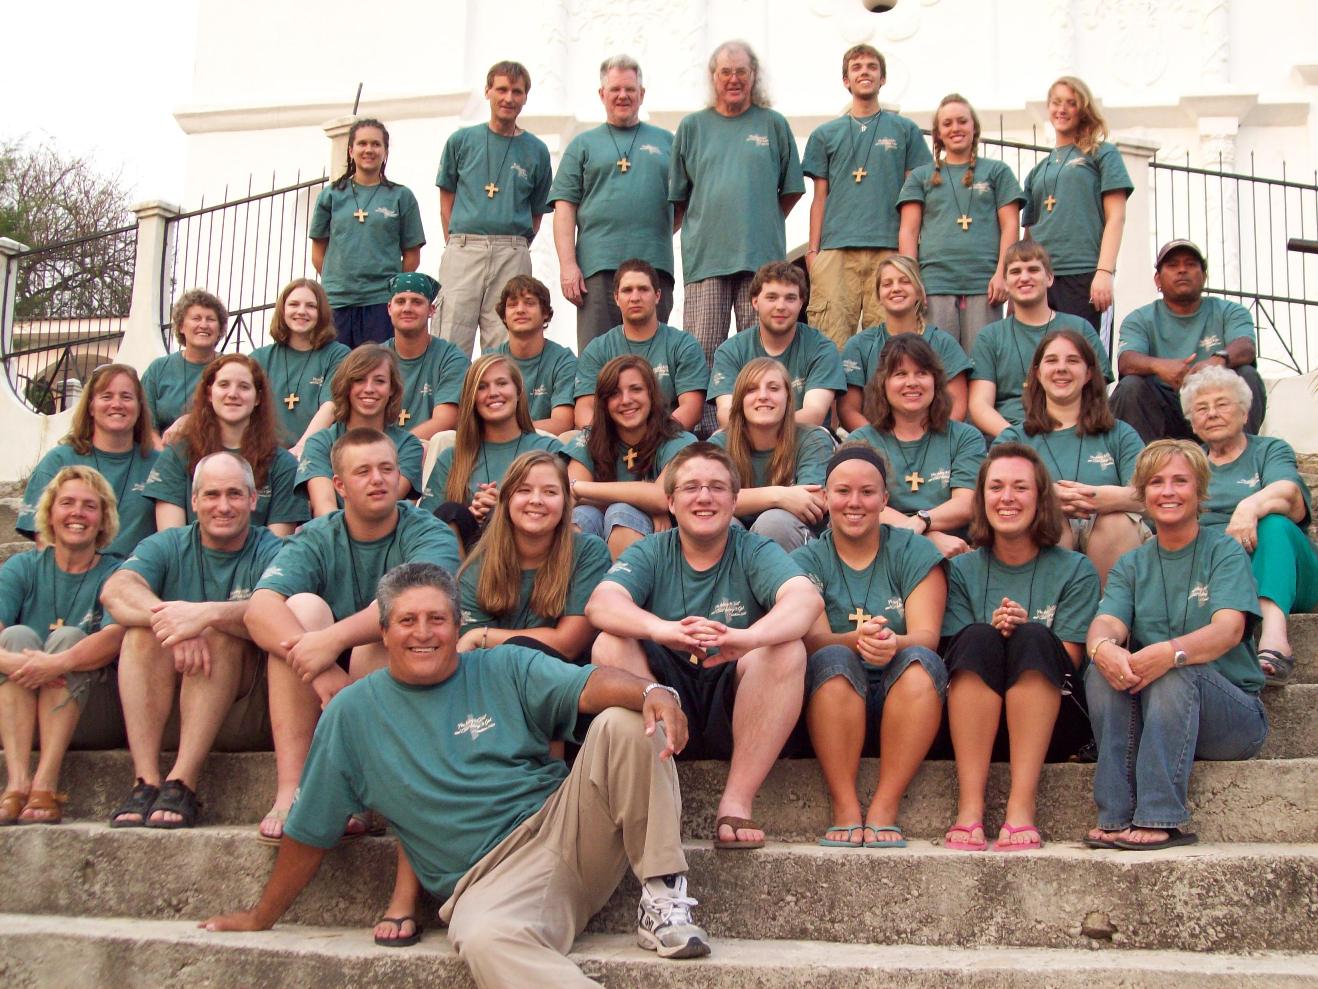 Mission Team poses for a group photo near the end of their mission trip